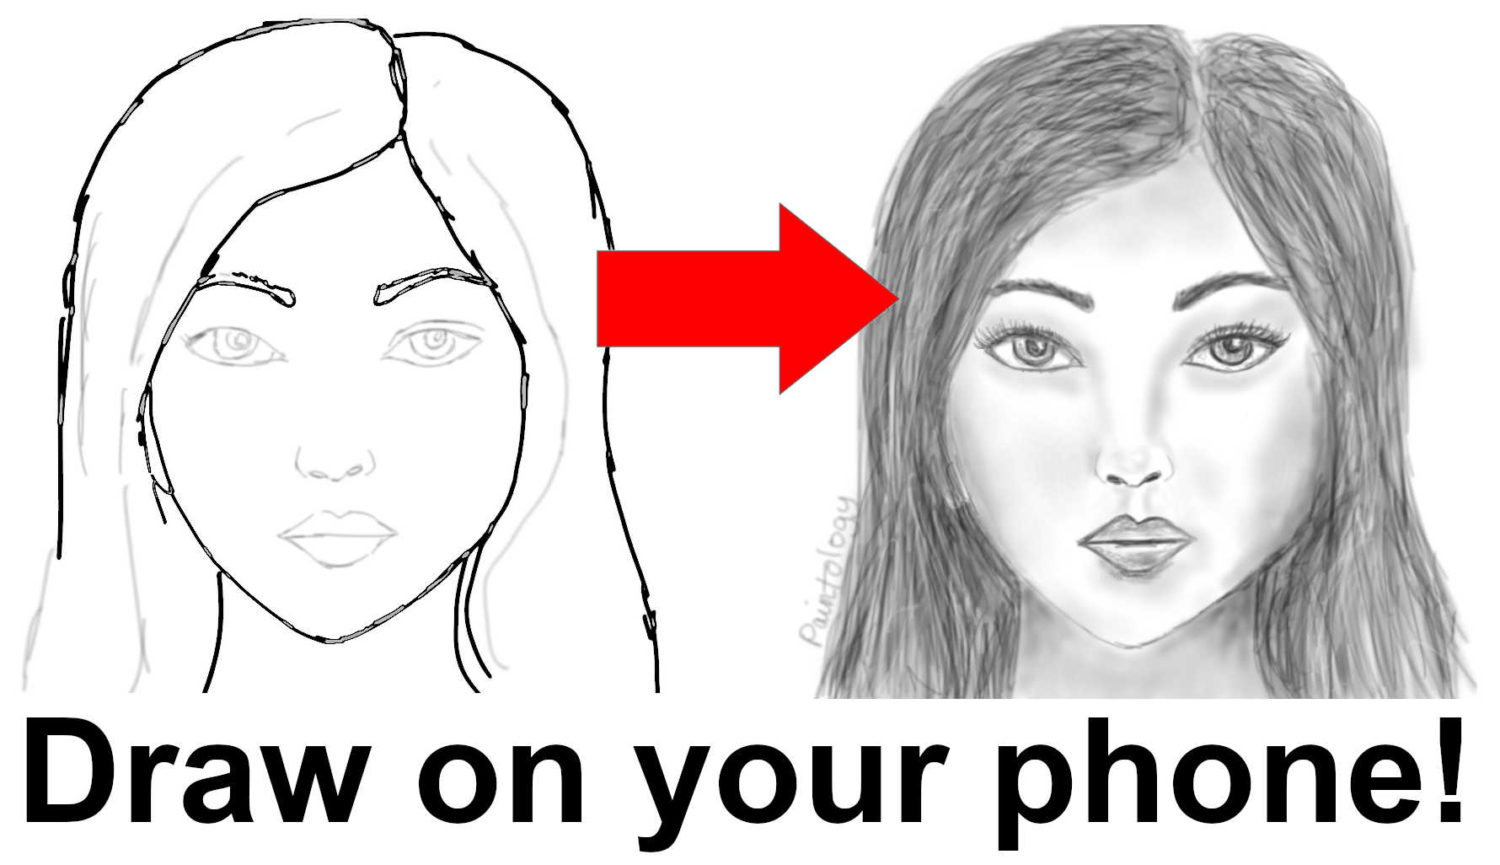 How To Draw A Face - An Easy Guide To More Realistic Faces-saigonsouth.com.vn